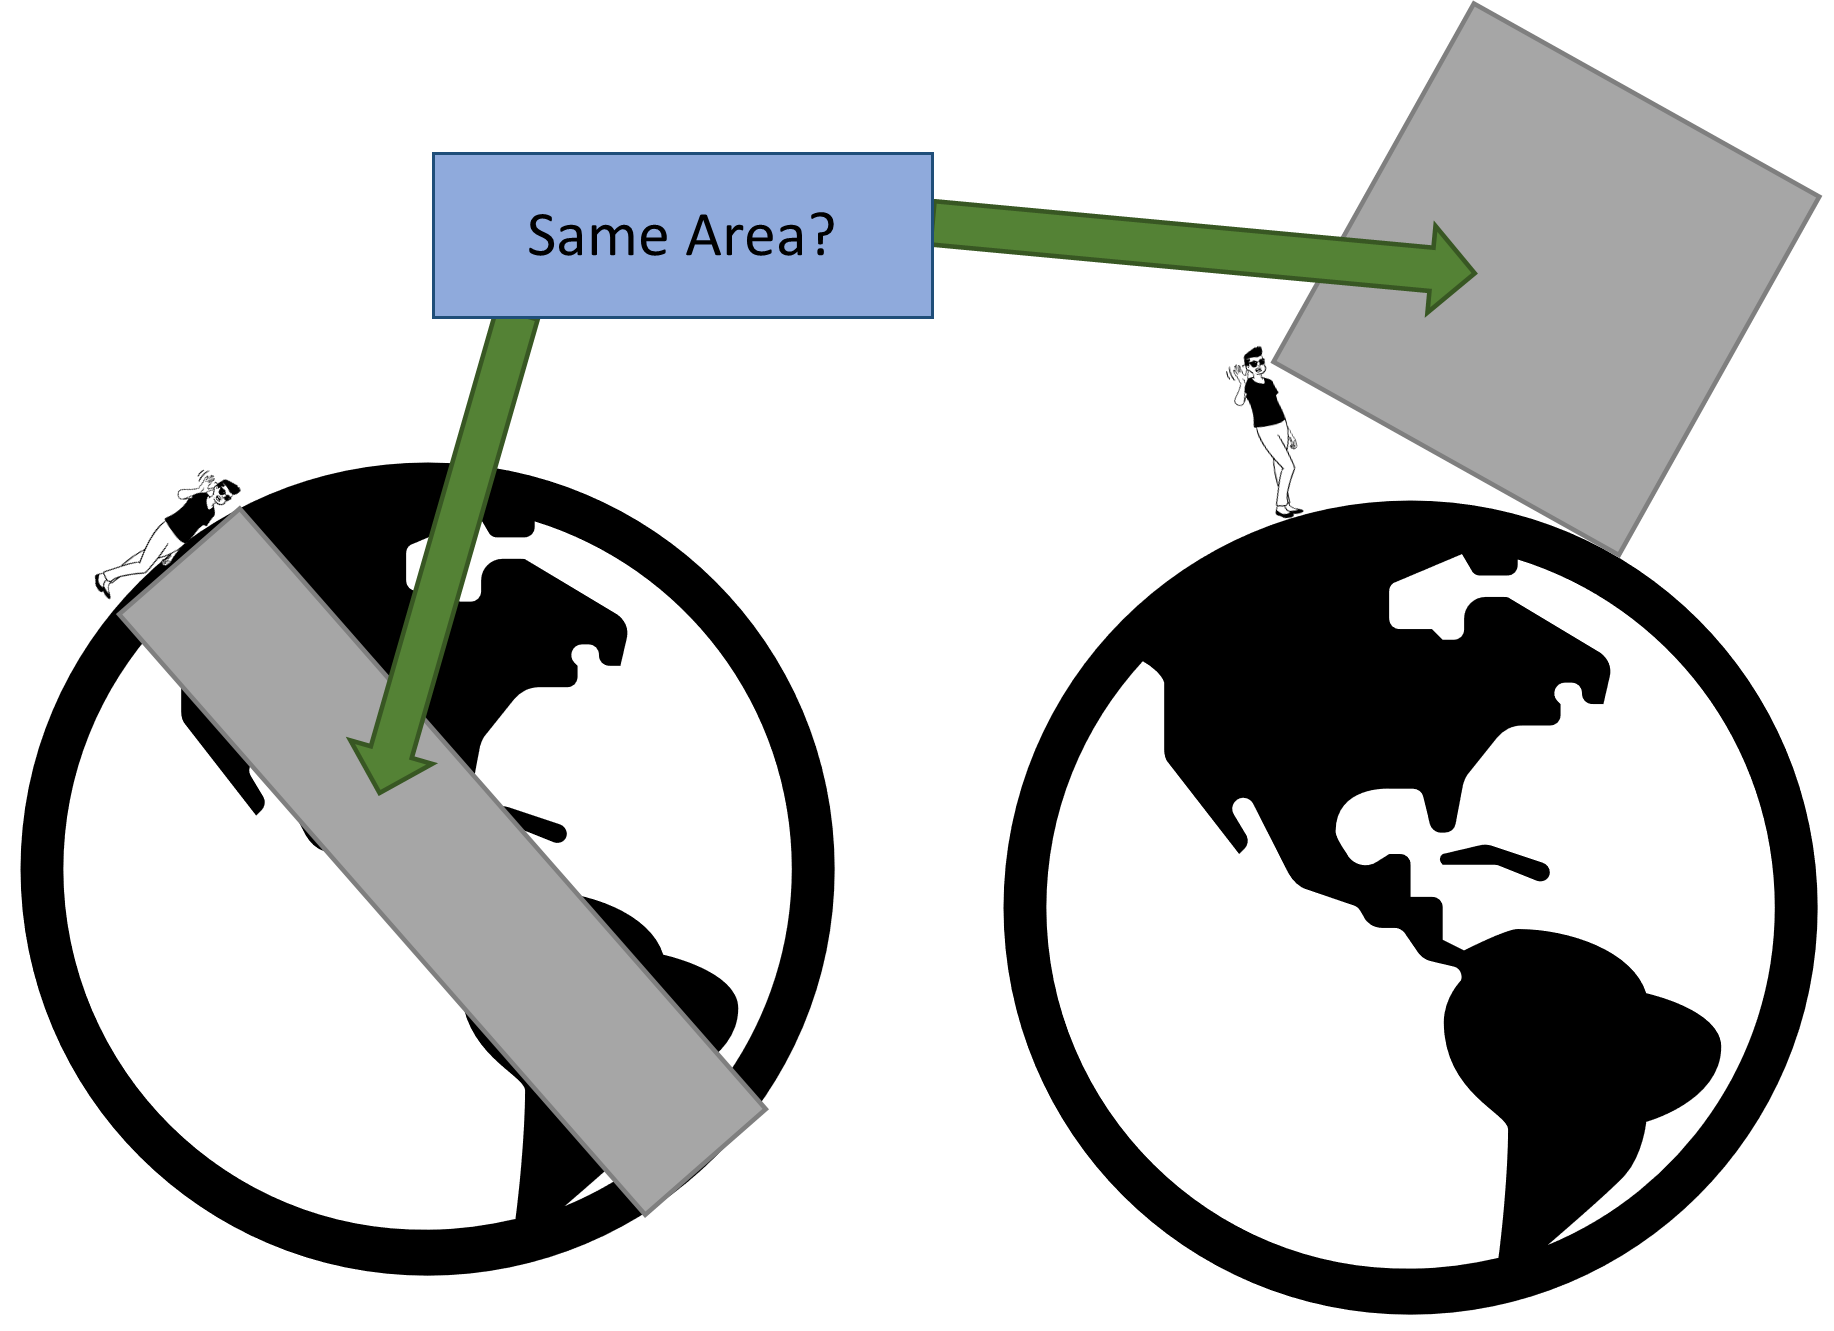 A blue rectangle with "Same Area?" inside with two green arrows pointing to two separate picture of planet earth. One with a grey rectangle going across the middle with a second with a square on with a corner touch the radius of the circle (earth).